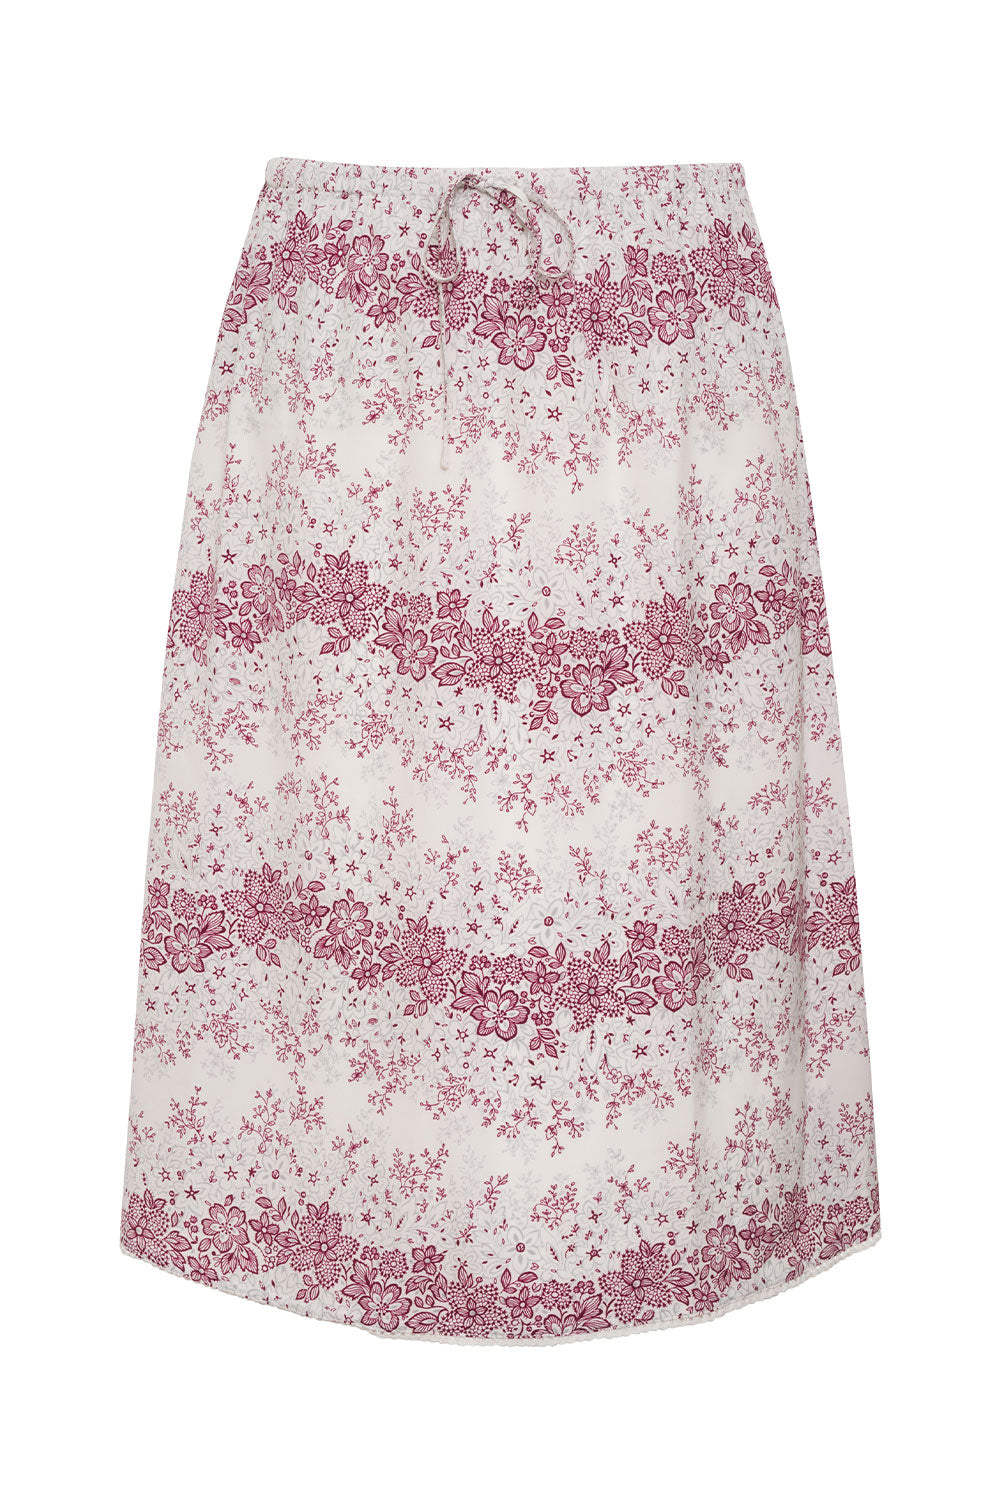 Sienna Floral Midi Skirt - Bisous Lace